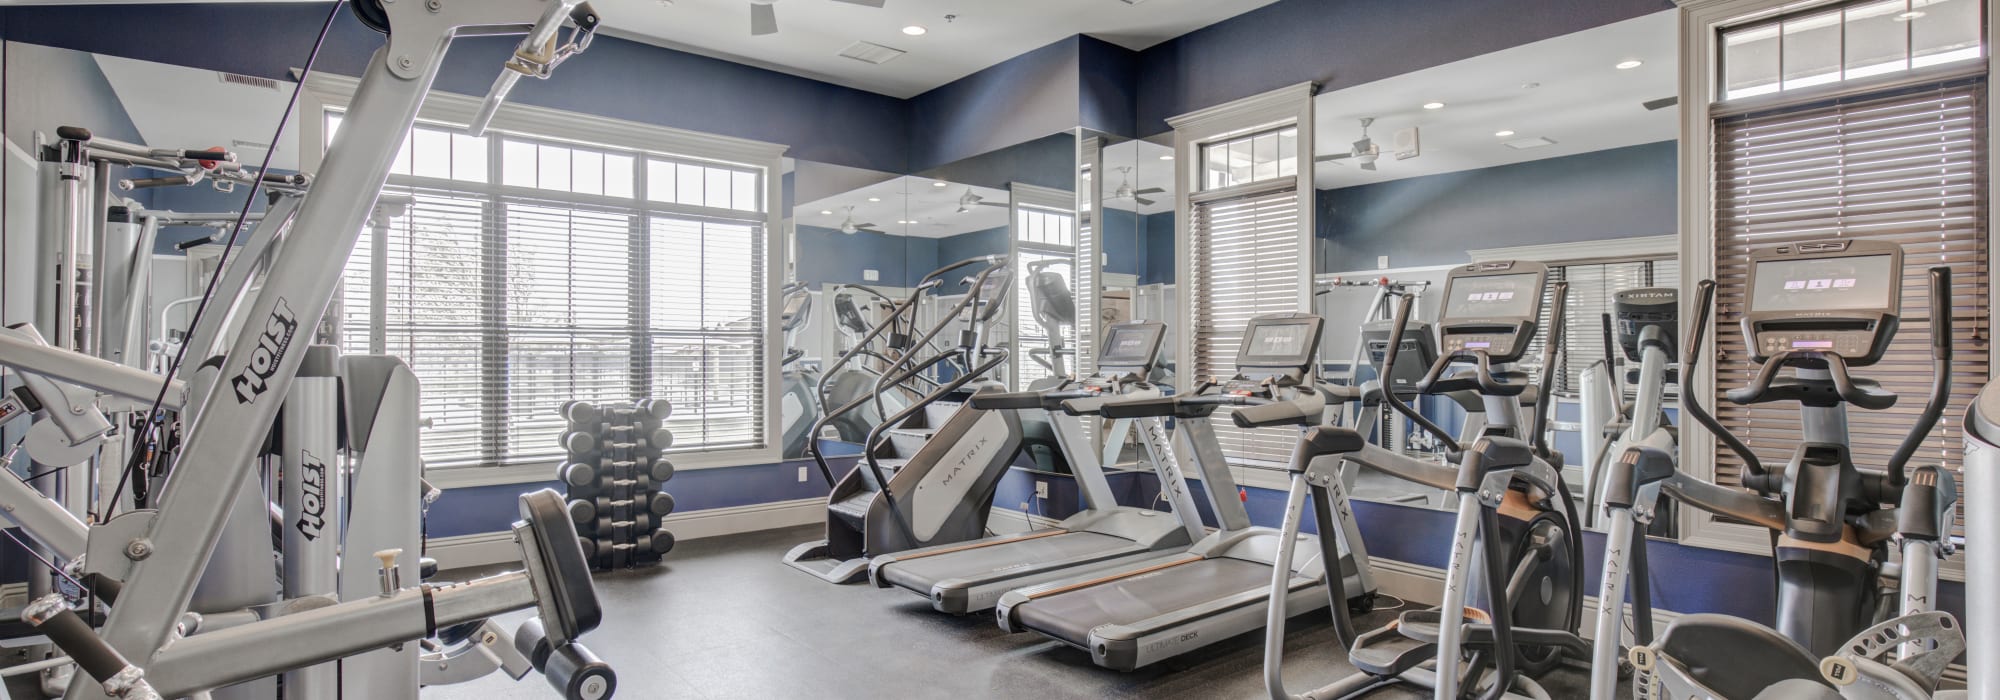 Fitness center with equipment 